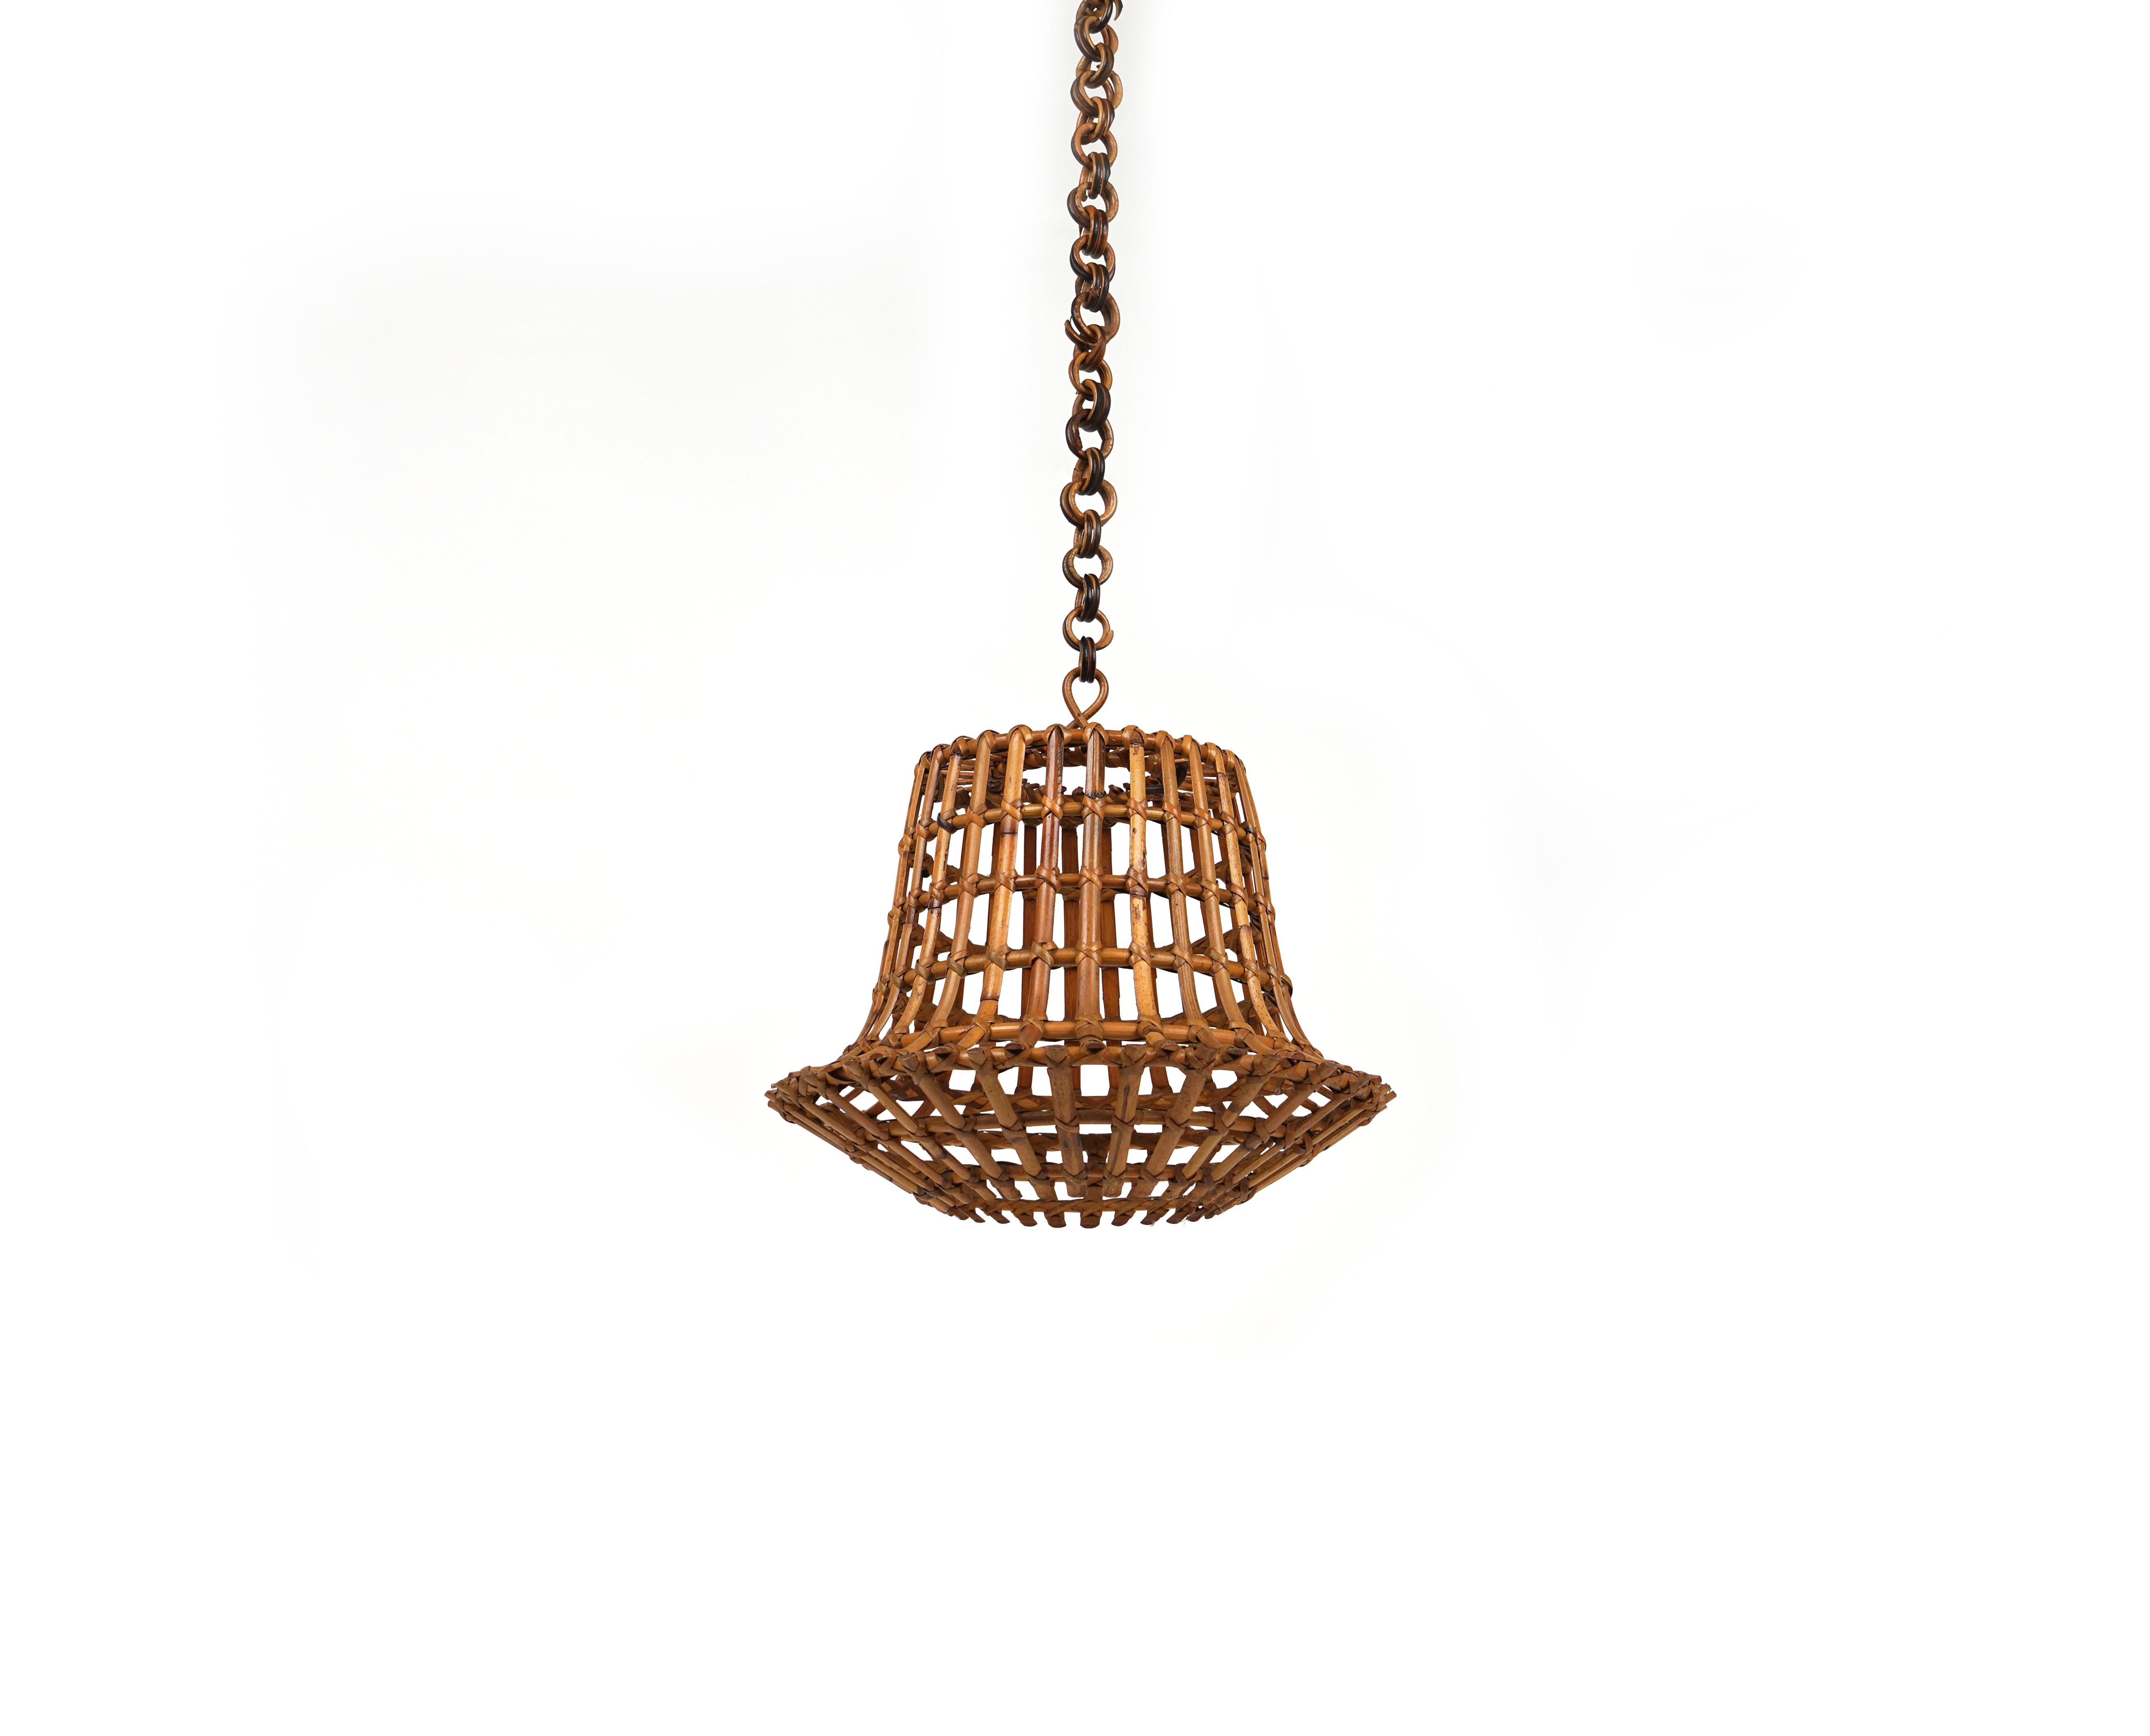 Mid-20th Century Midcentury Bamboo and Rattan Chandelier Louis Sognot Style, Italy 1960s For Sale